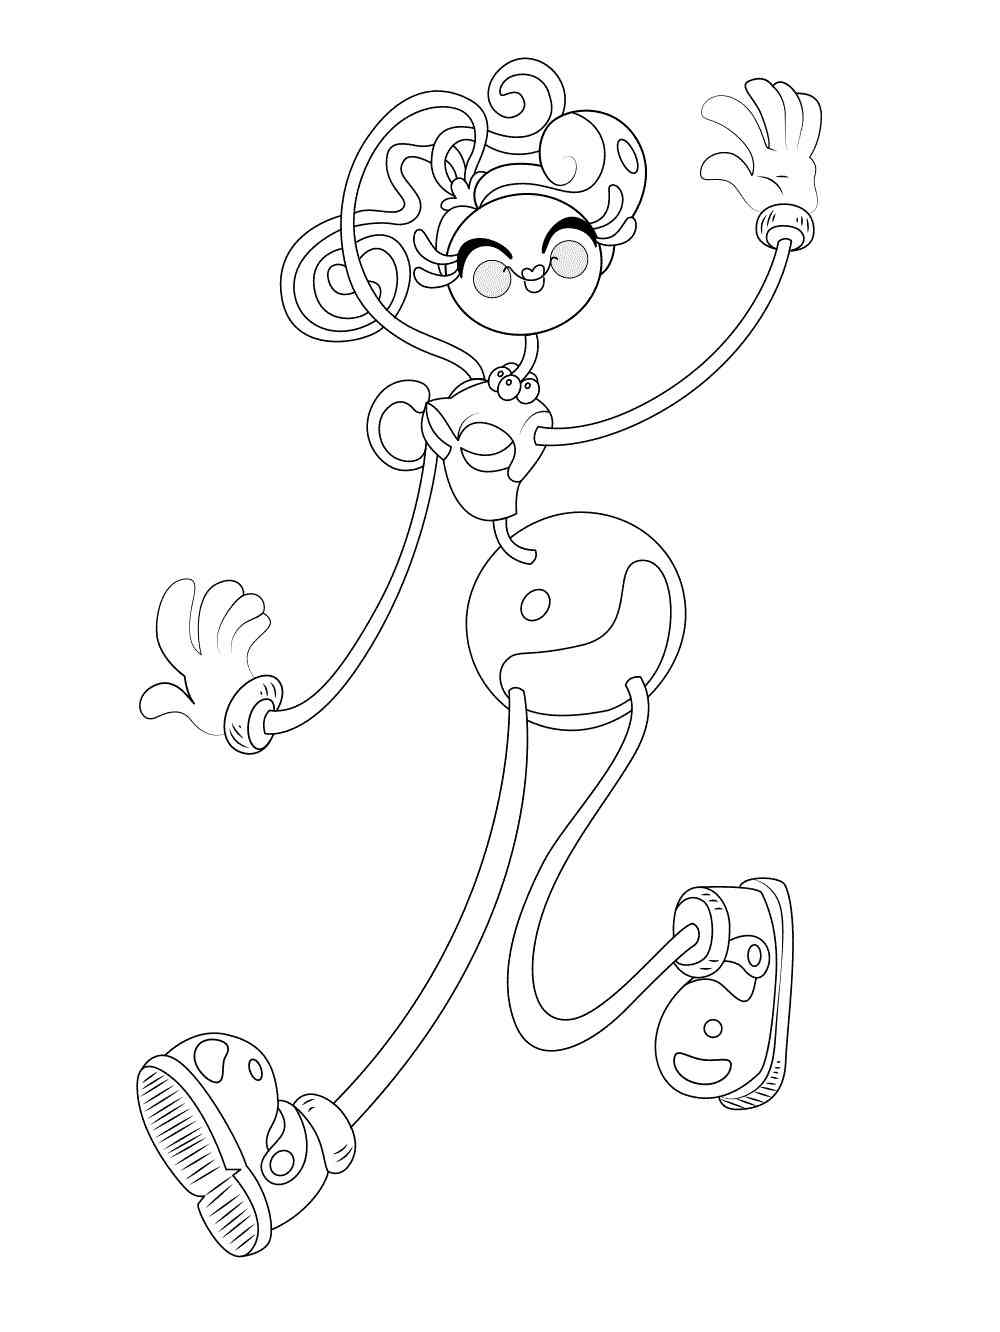 Dancing Mommy Long Legs coloring page